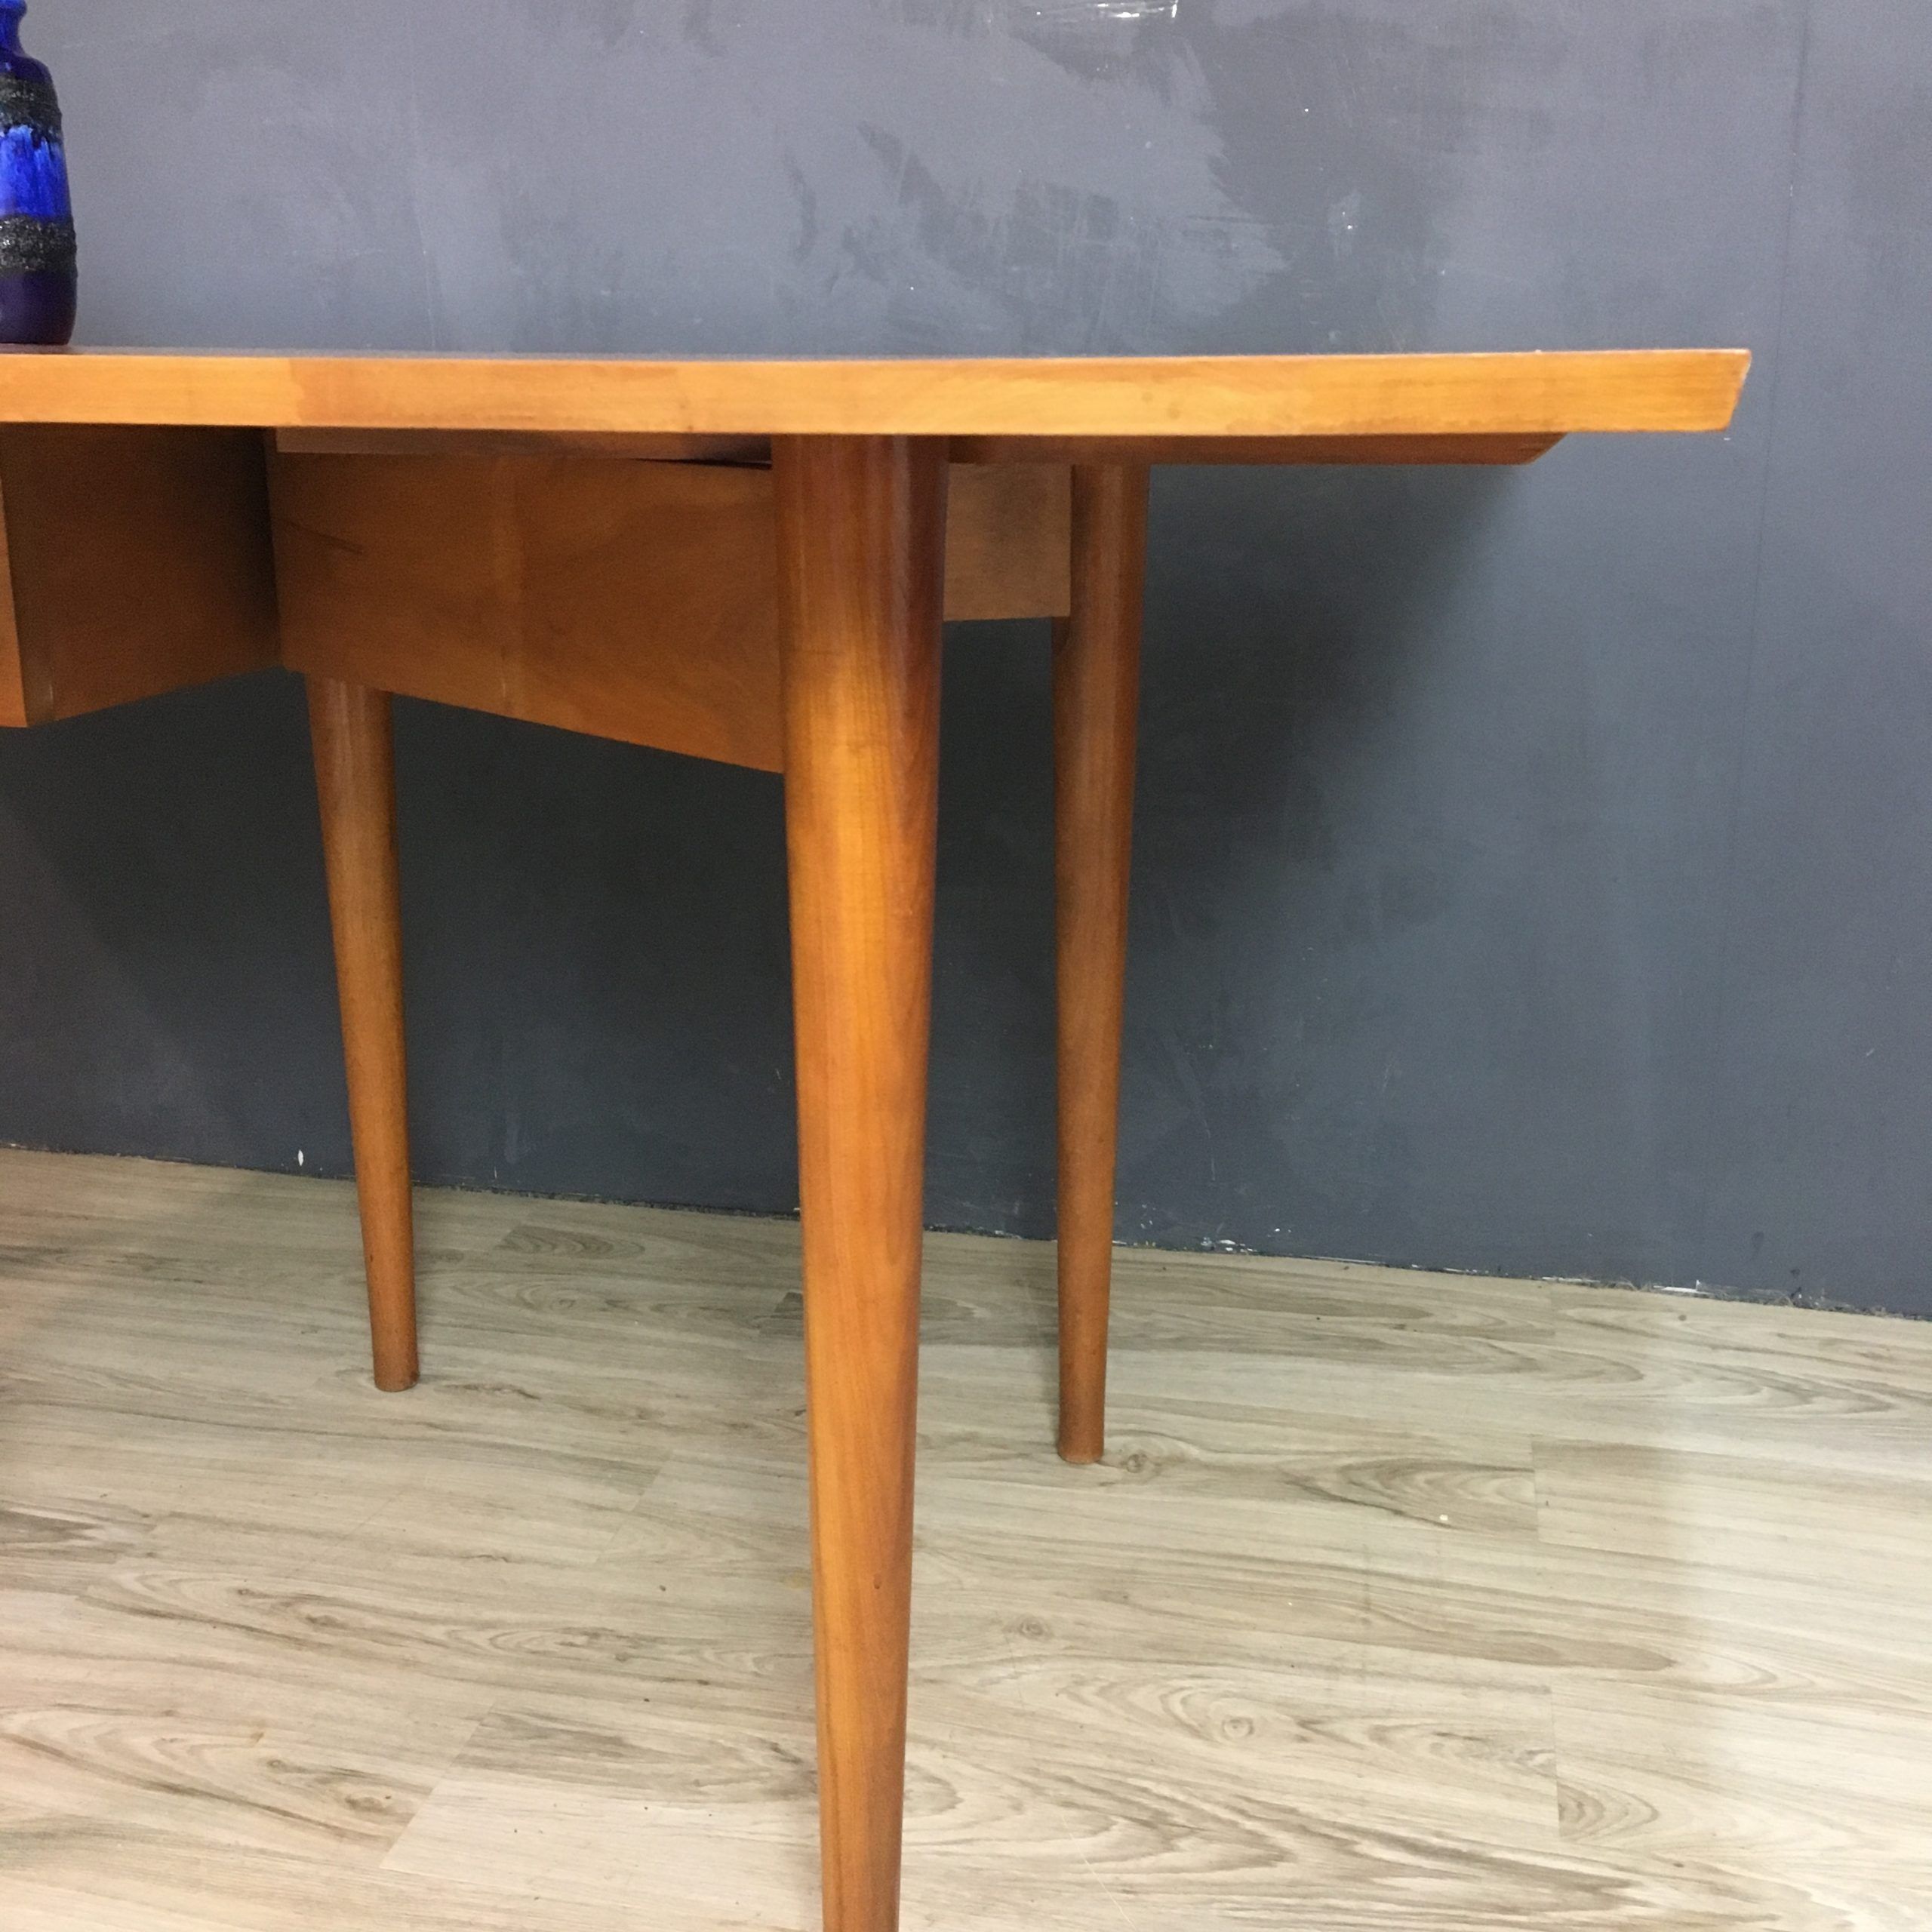 Gaspard Maple Solid Wood Pedestal Dining Tables Intended For 2019 Conant Ball Maple Drop Leaf Dining Table – Retrocraft (View 10 of 20)